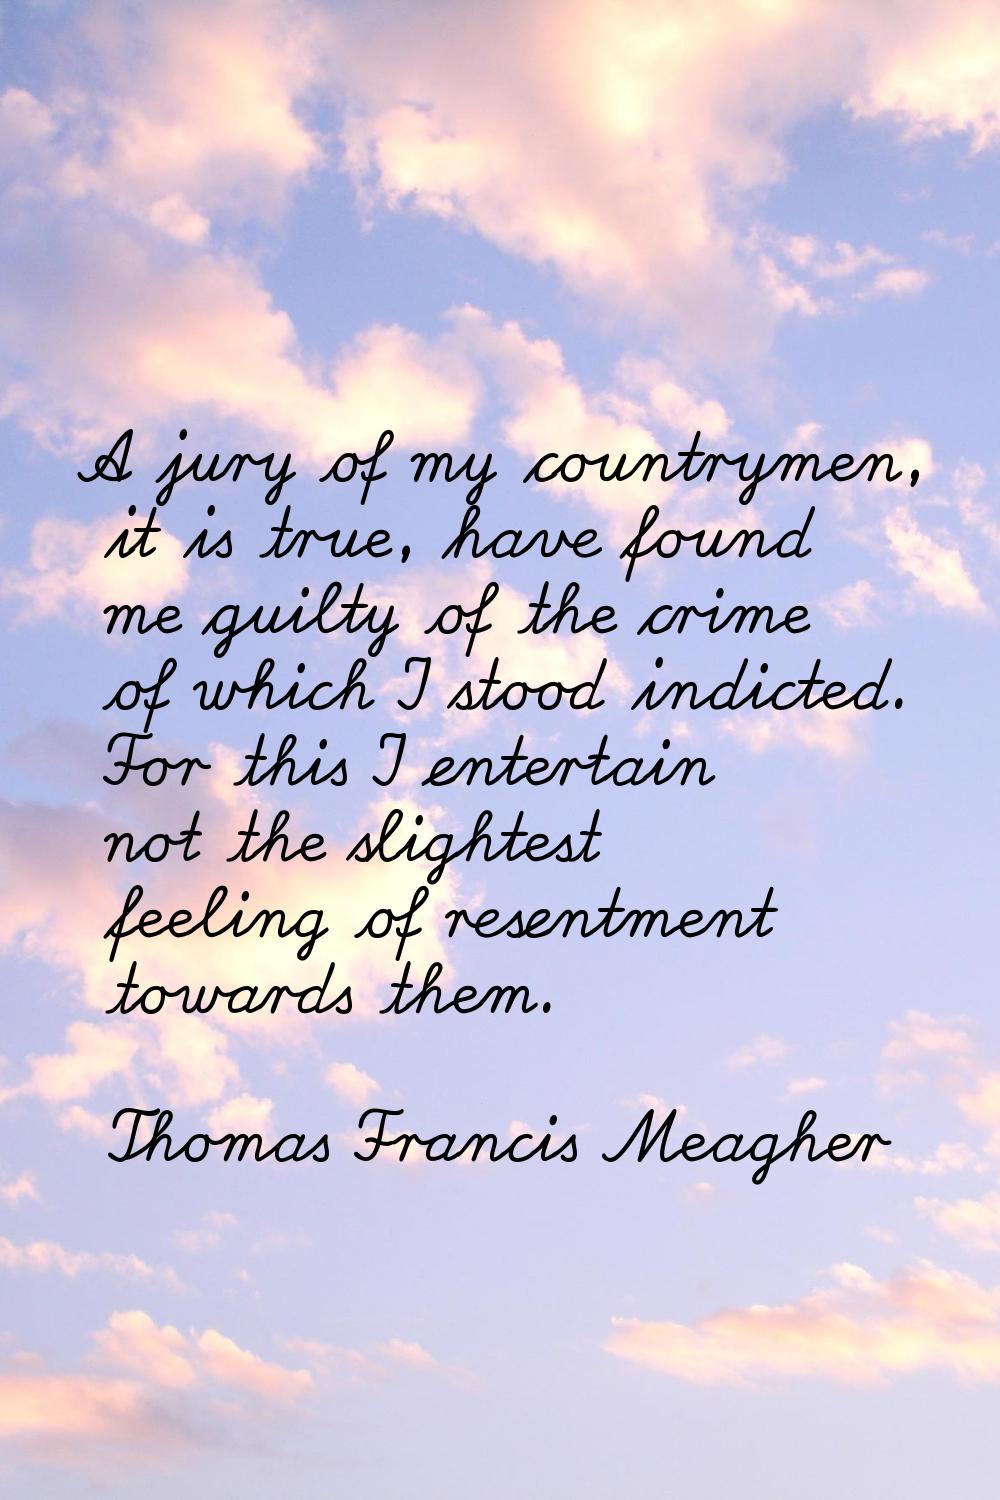 A jury of my countrymen, it is true, have found me guilty of the crime of which I stood indicted. F